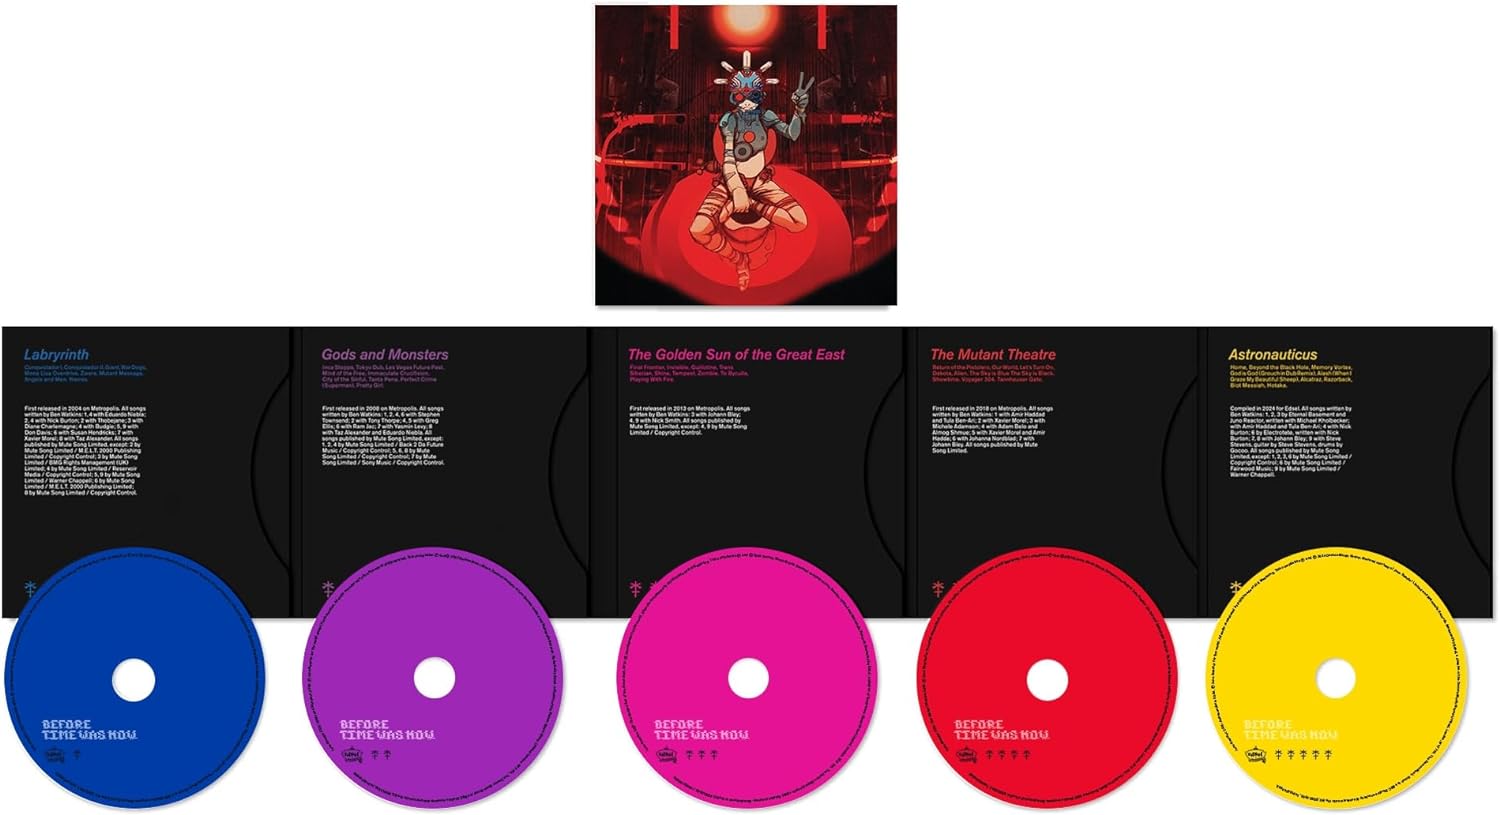 JUNO REACTOR - Before Time Was Now (with SIGNED Print) - Deluxe 5CD Set [AUG 30]